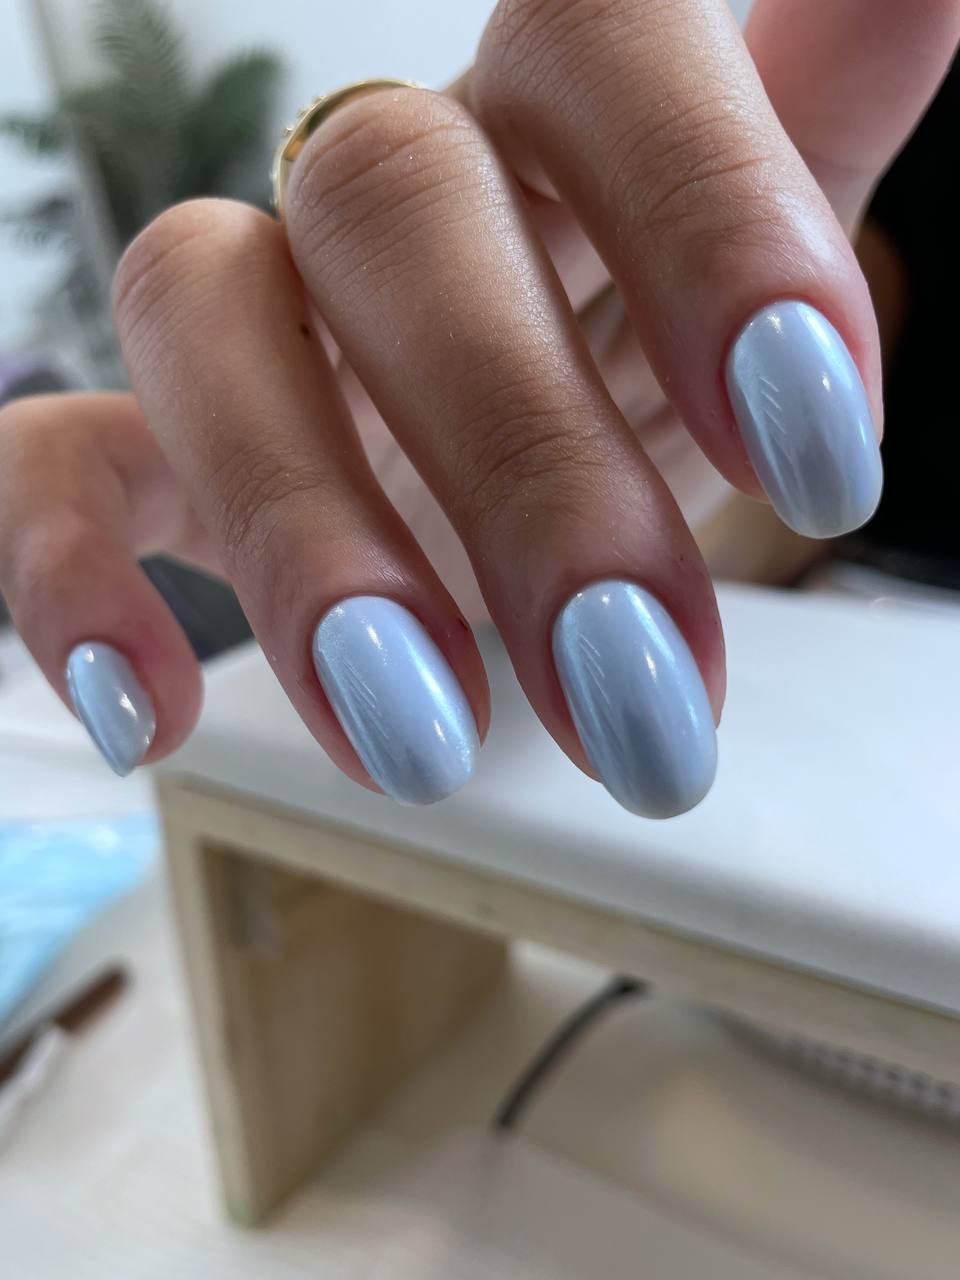 Candy Rubber Base Coat 79 – Candy Baby Blue